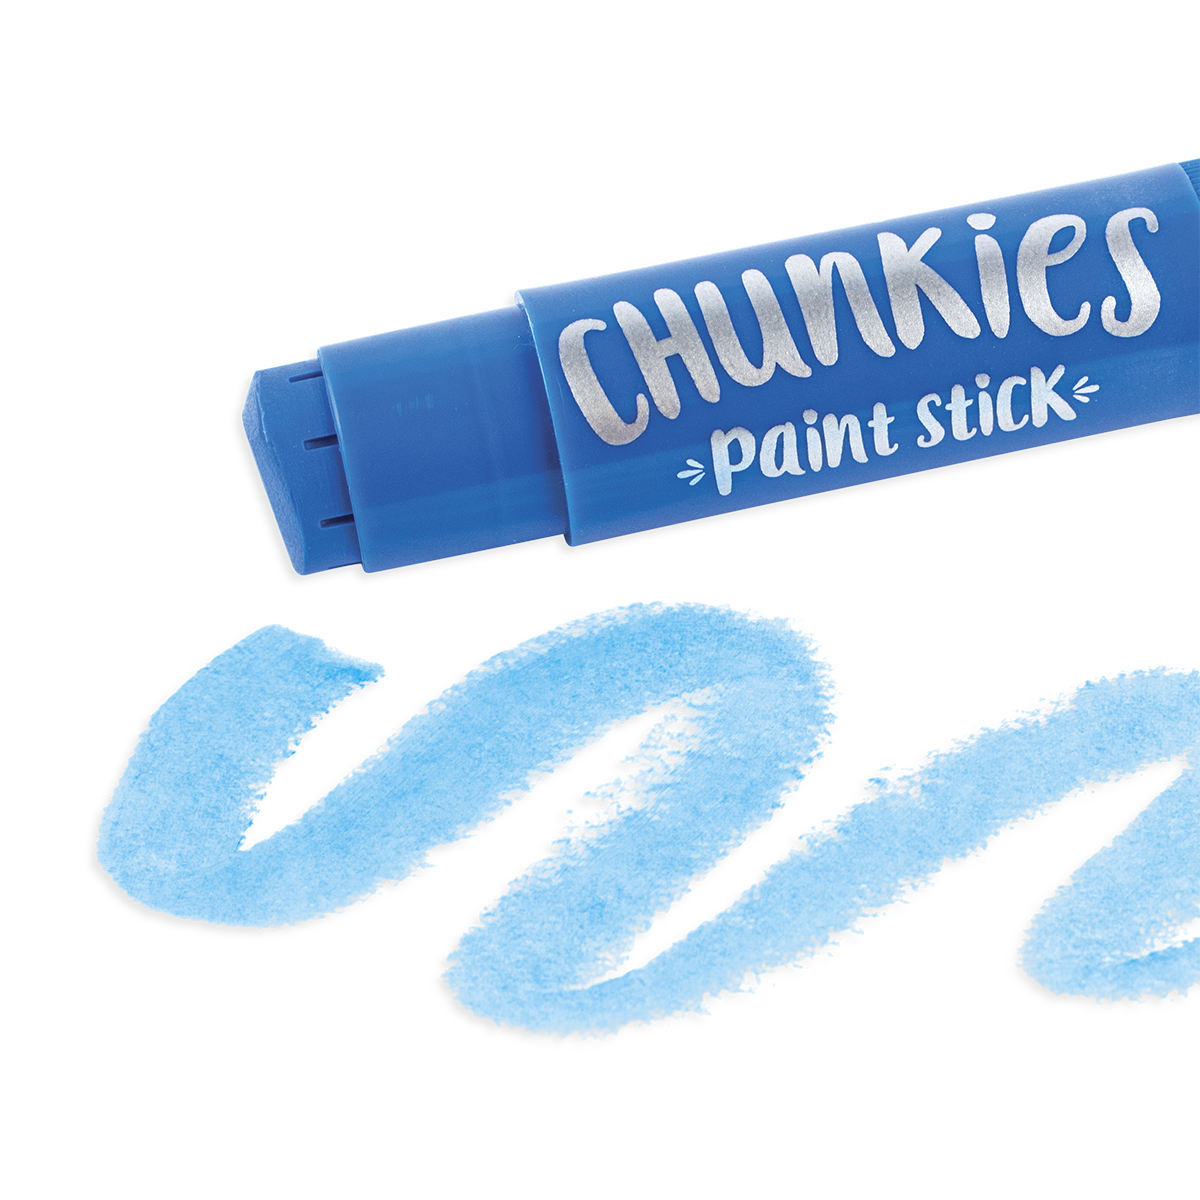 Pastimes Toy Store on Instagram: Chunkies Paint Sticks! A super popular  art supply for all ages! • • • • • #holidays #family #parenting #winter  #fun #joy #momlife #kids #happy #toystore #secheltbc #